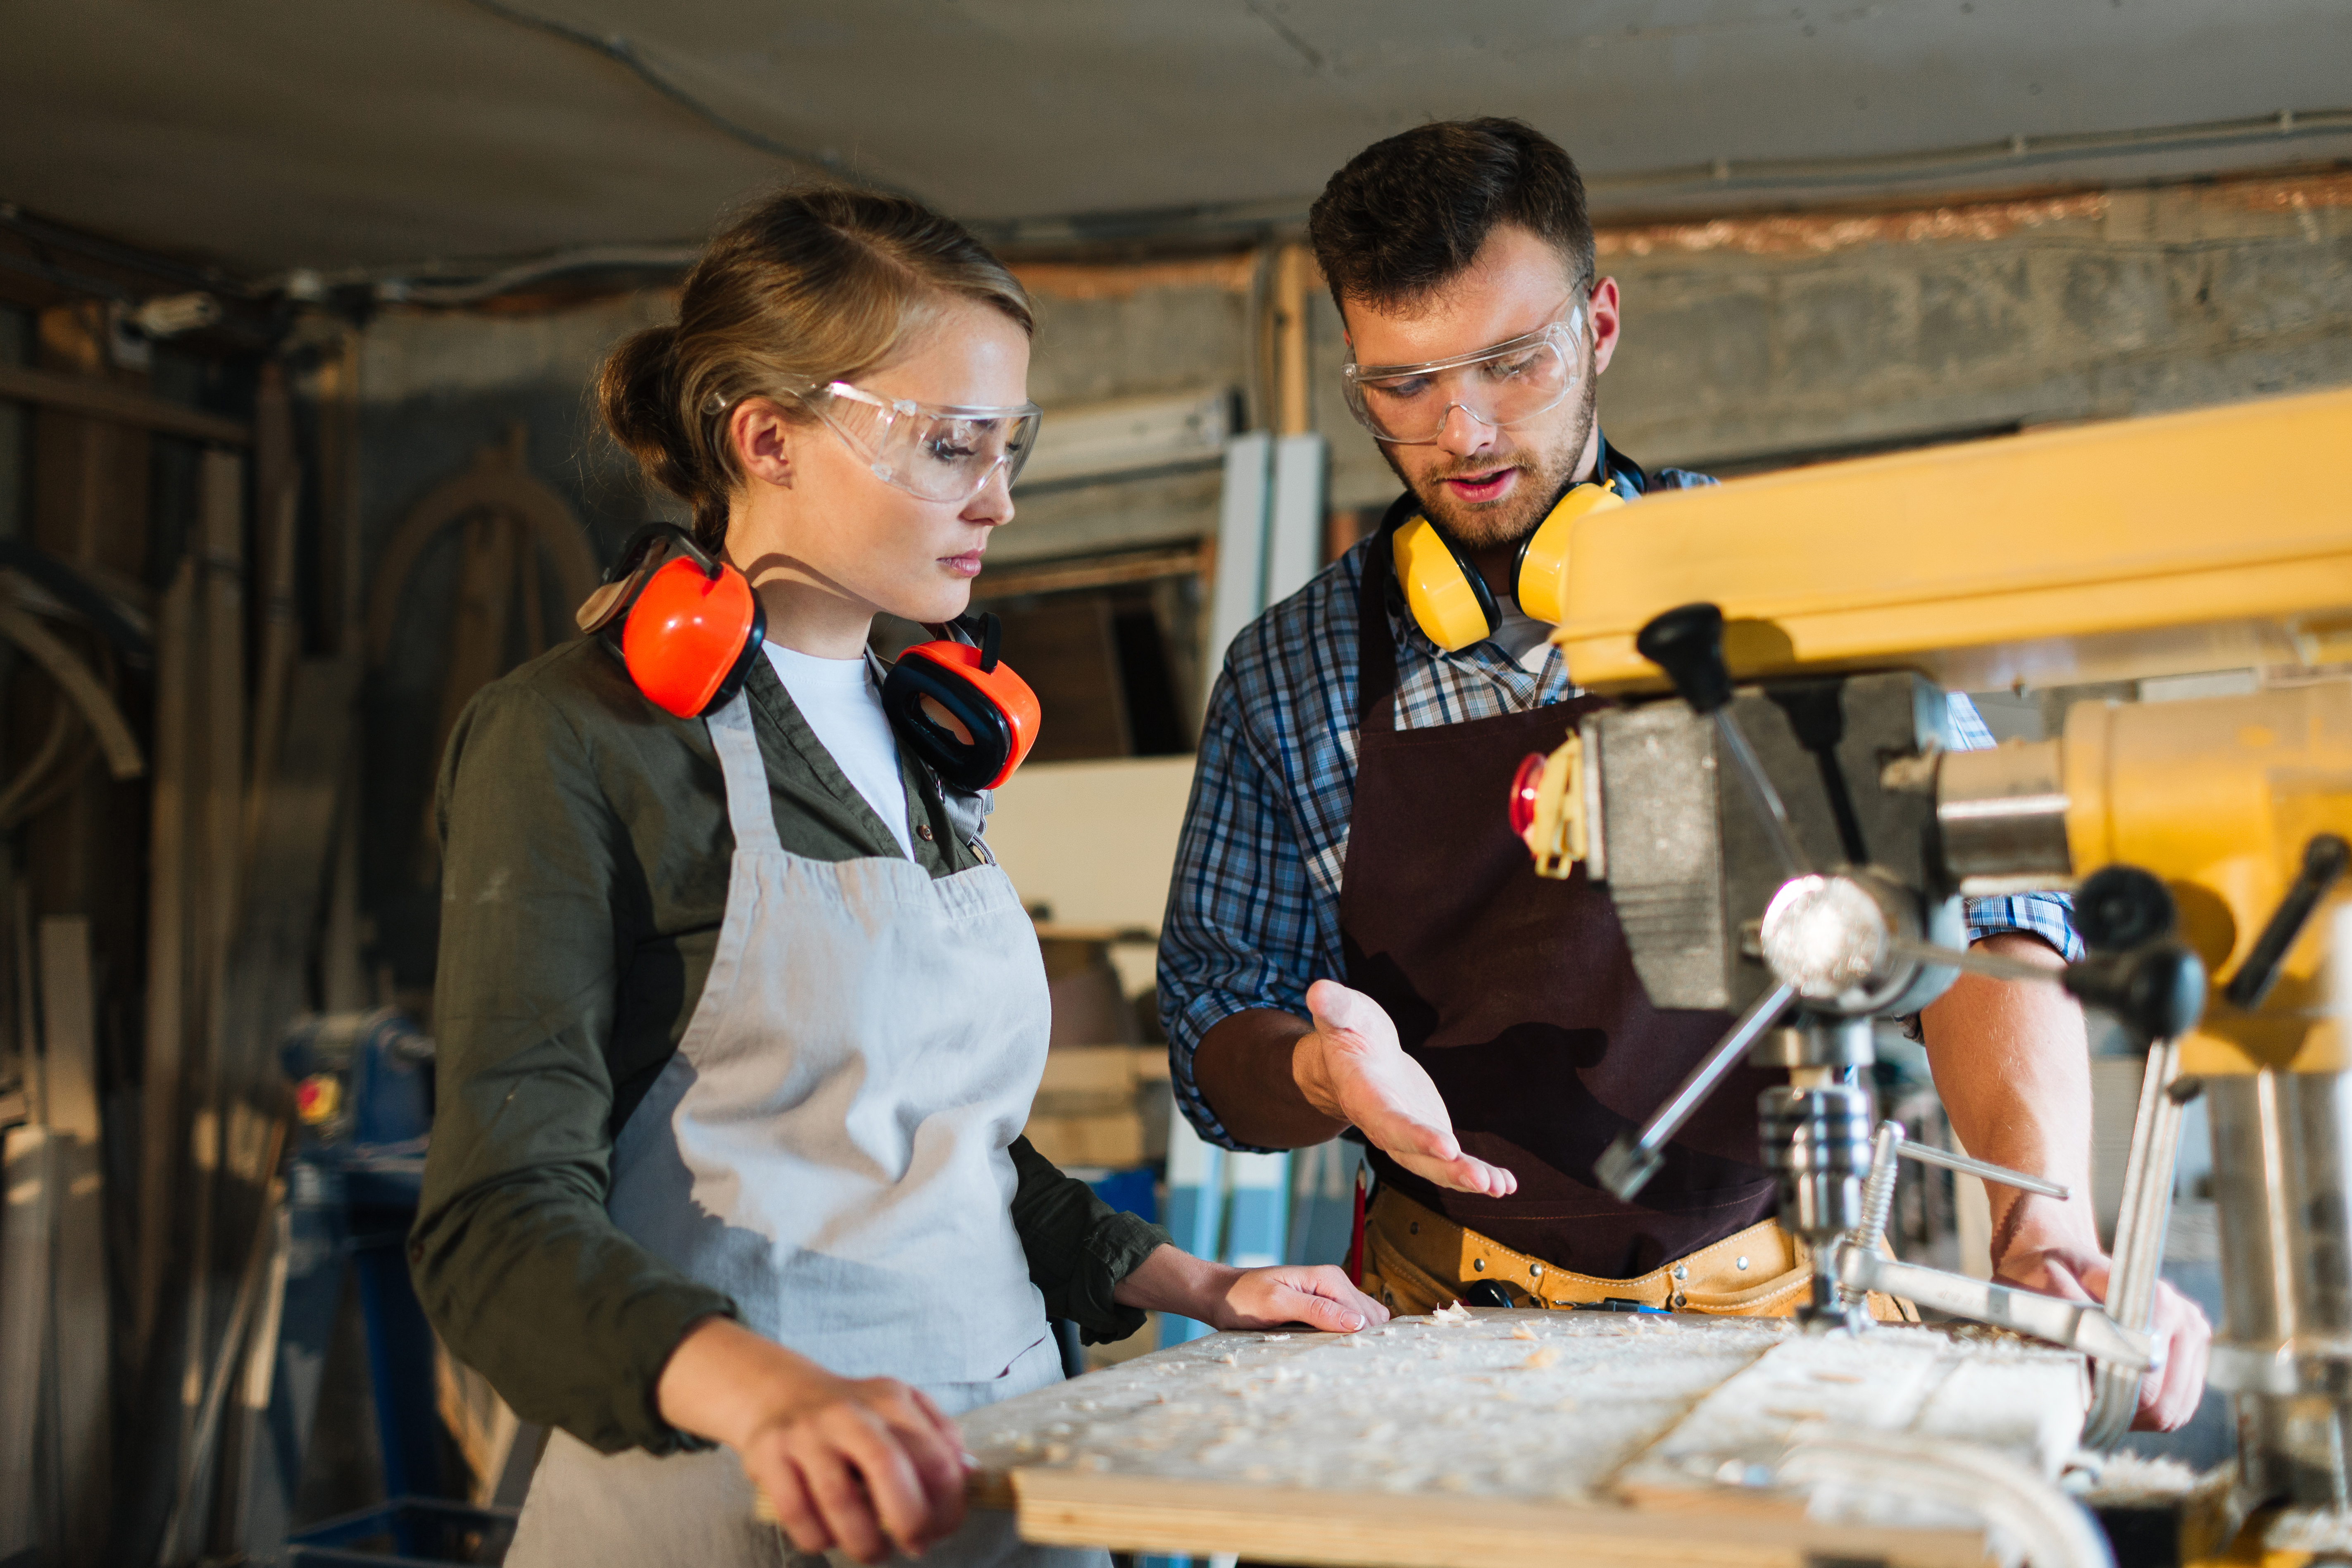 A man is explaining to a woman how to use woodworking equipment. They are both wearing protective gear.